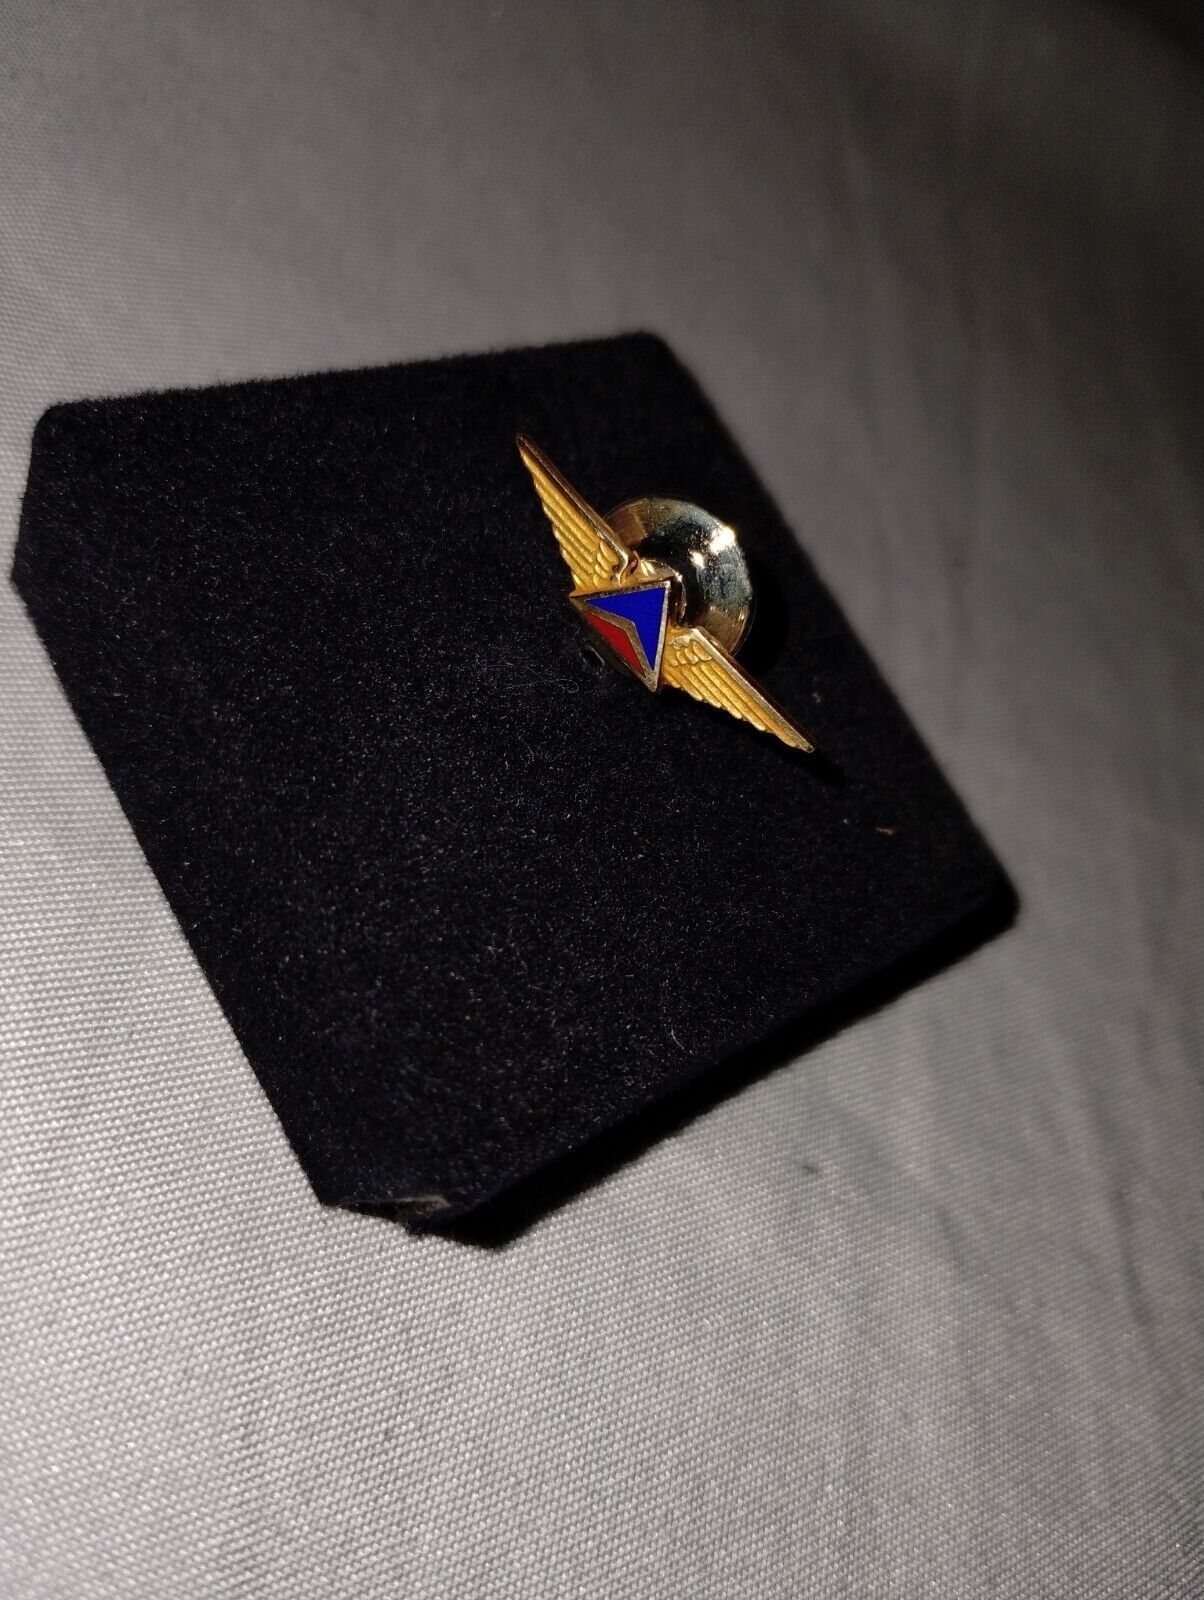 VINTAGE DELTA AIRLINES WINGS BADGE SERVICE PIN 10K GOLD LAPEL PIN TIE TAC 